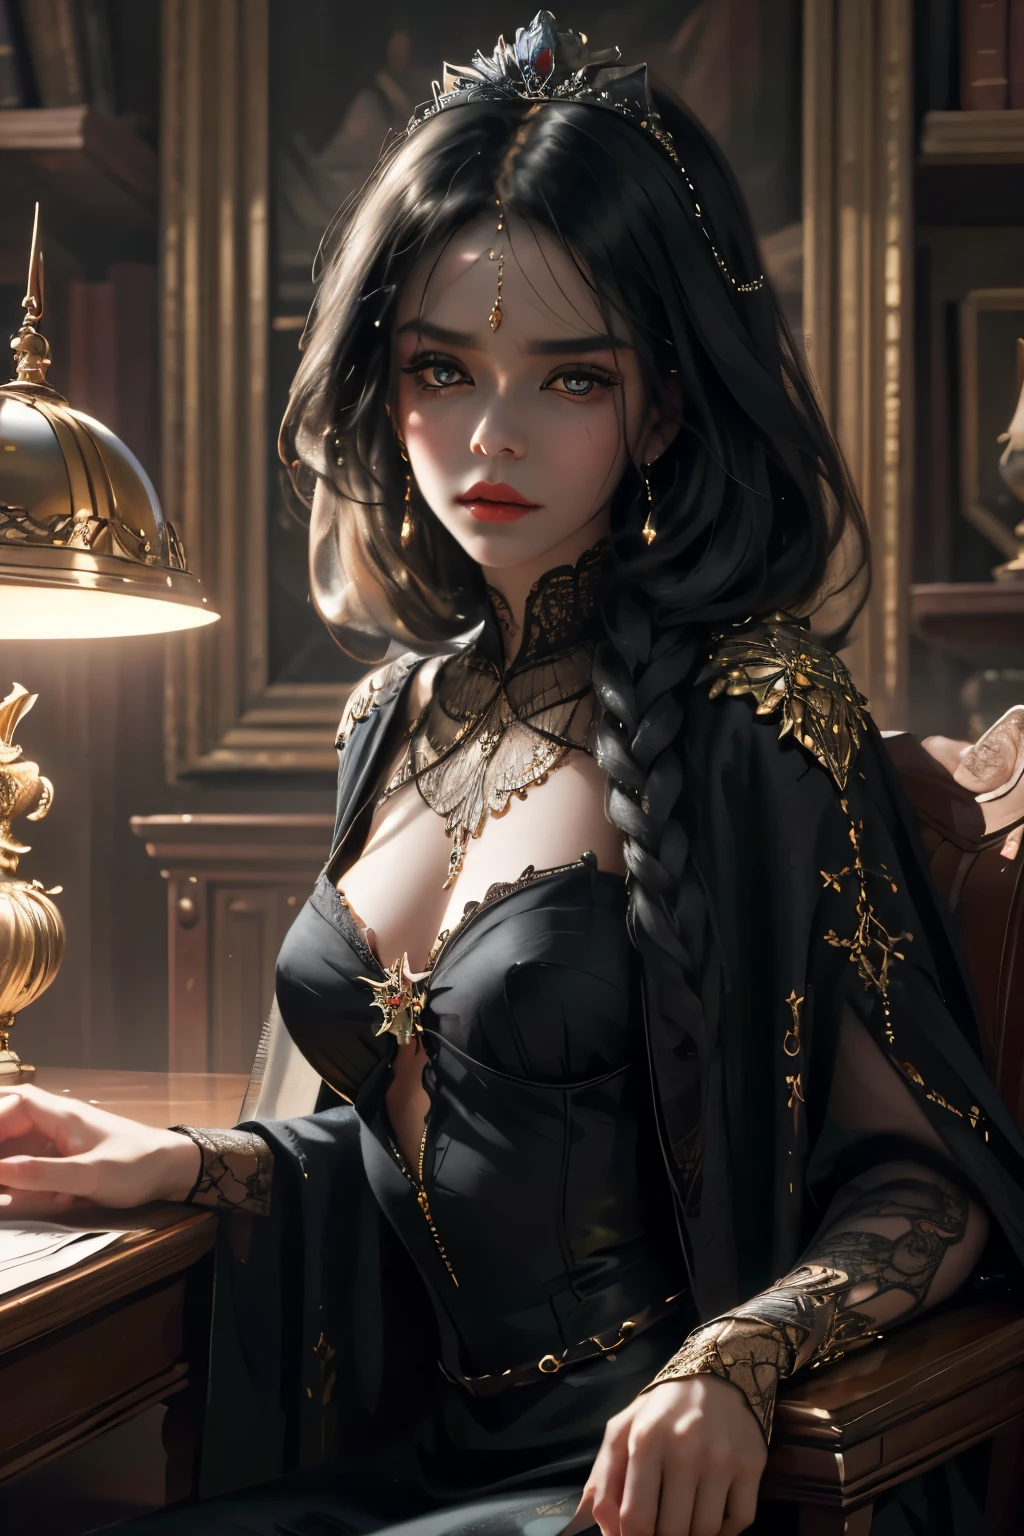 A mesmerizing oil painting portraying a regal woman in a dimly lit library, surrounded by towering bookshelves filled with leather-bound volumes. The queen sits upon an antique velvet armchair, her posture elegant and commanding. Her attire exudes dark academia vibes, with a flowing black dress adorned with intricate lace details. A crown rests gently on her head, accentuating her power and authority. The warm glow of a vintage desk lamp casts soft shadows, illuminating her face with a mysterious ambiance. The artist skillfully captures her piercing gaze, hinting at intelligence and wisdom beyond measure. Every brushstroke adds depth to her dark, wavy hair and her pale skin, creating a hauntingly beautiful portrait. The overall composition is reminiscent of classical portraits, blending realism with a touch of gothic elegance.